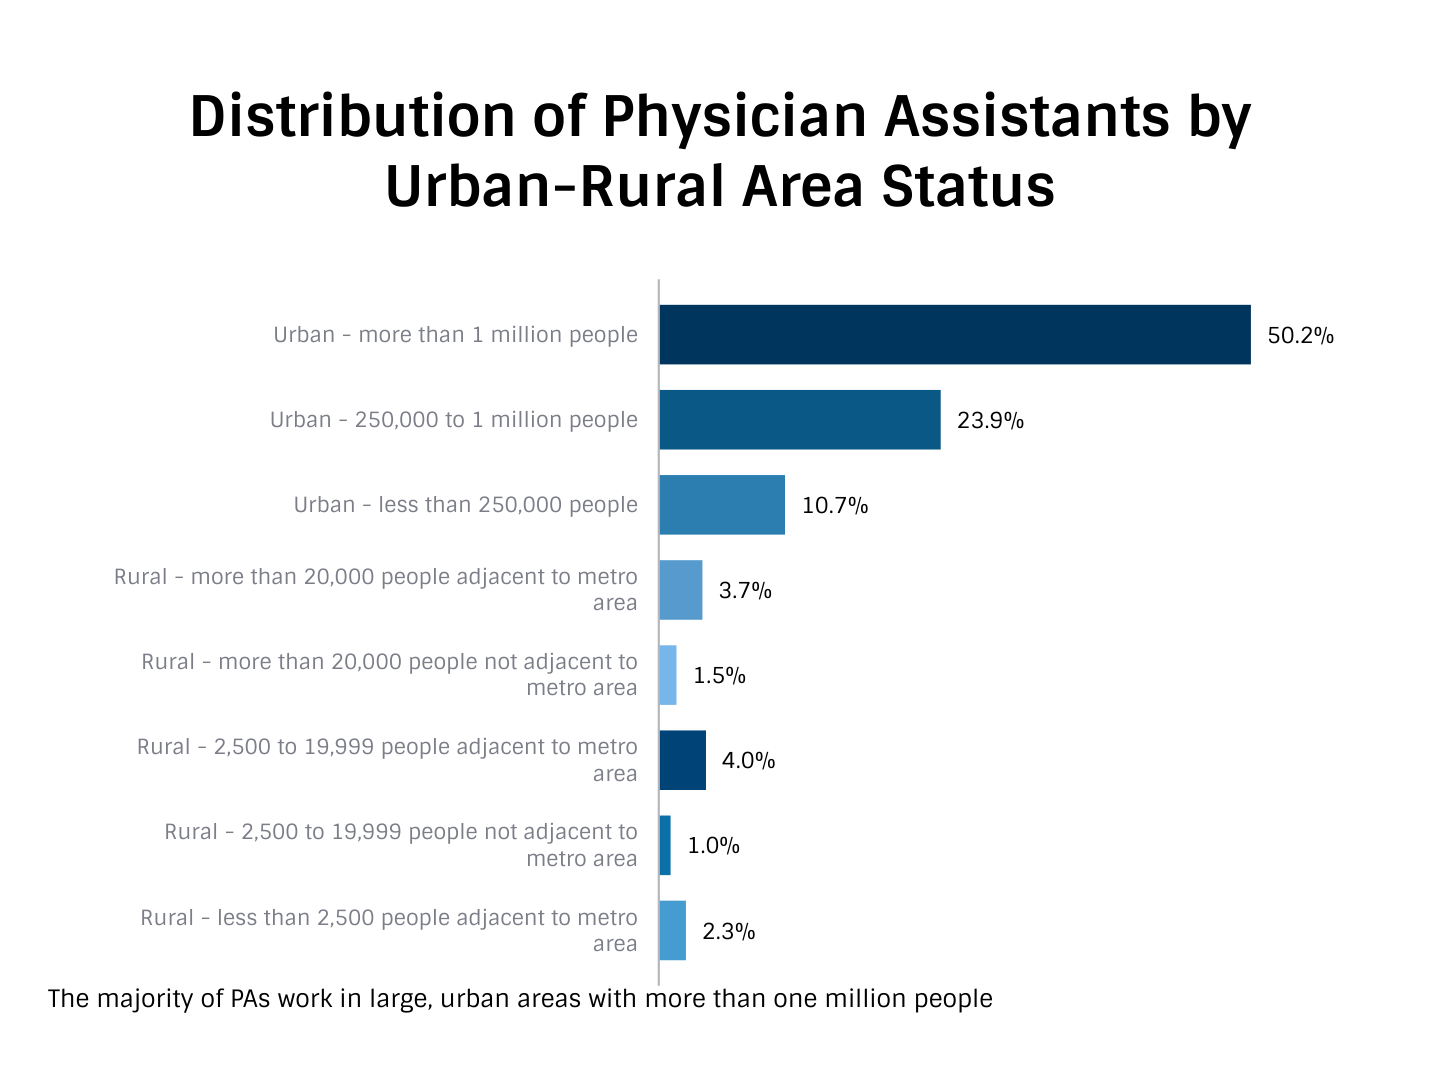 Distribution of PAs by Urban-Rural Area Status